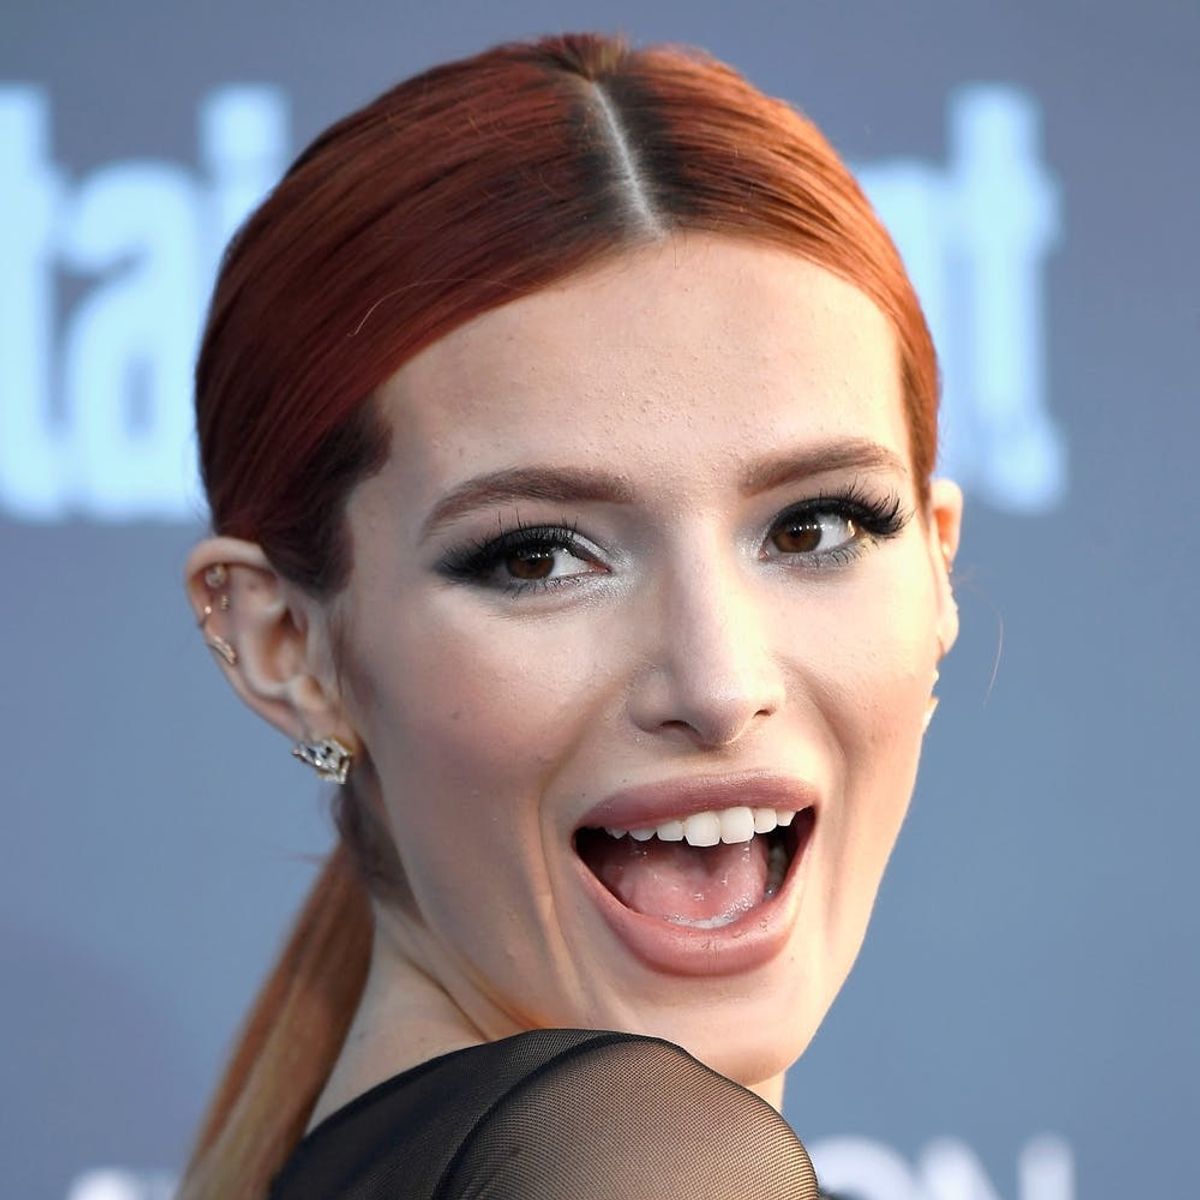 Bella Thorne Just Got a Tiny Tattoo in a Very Unexpected Place